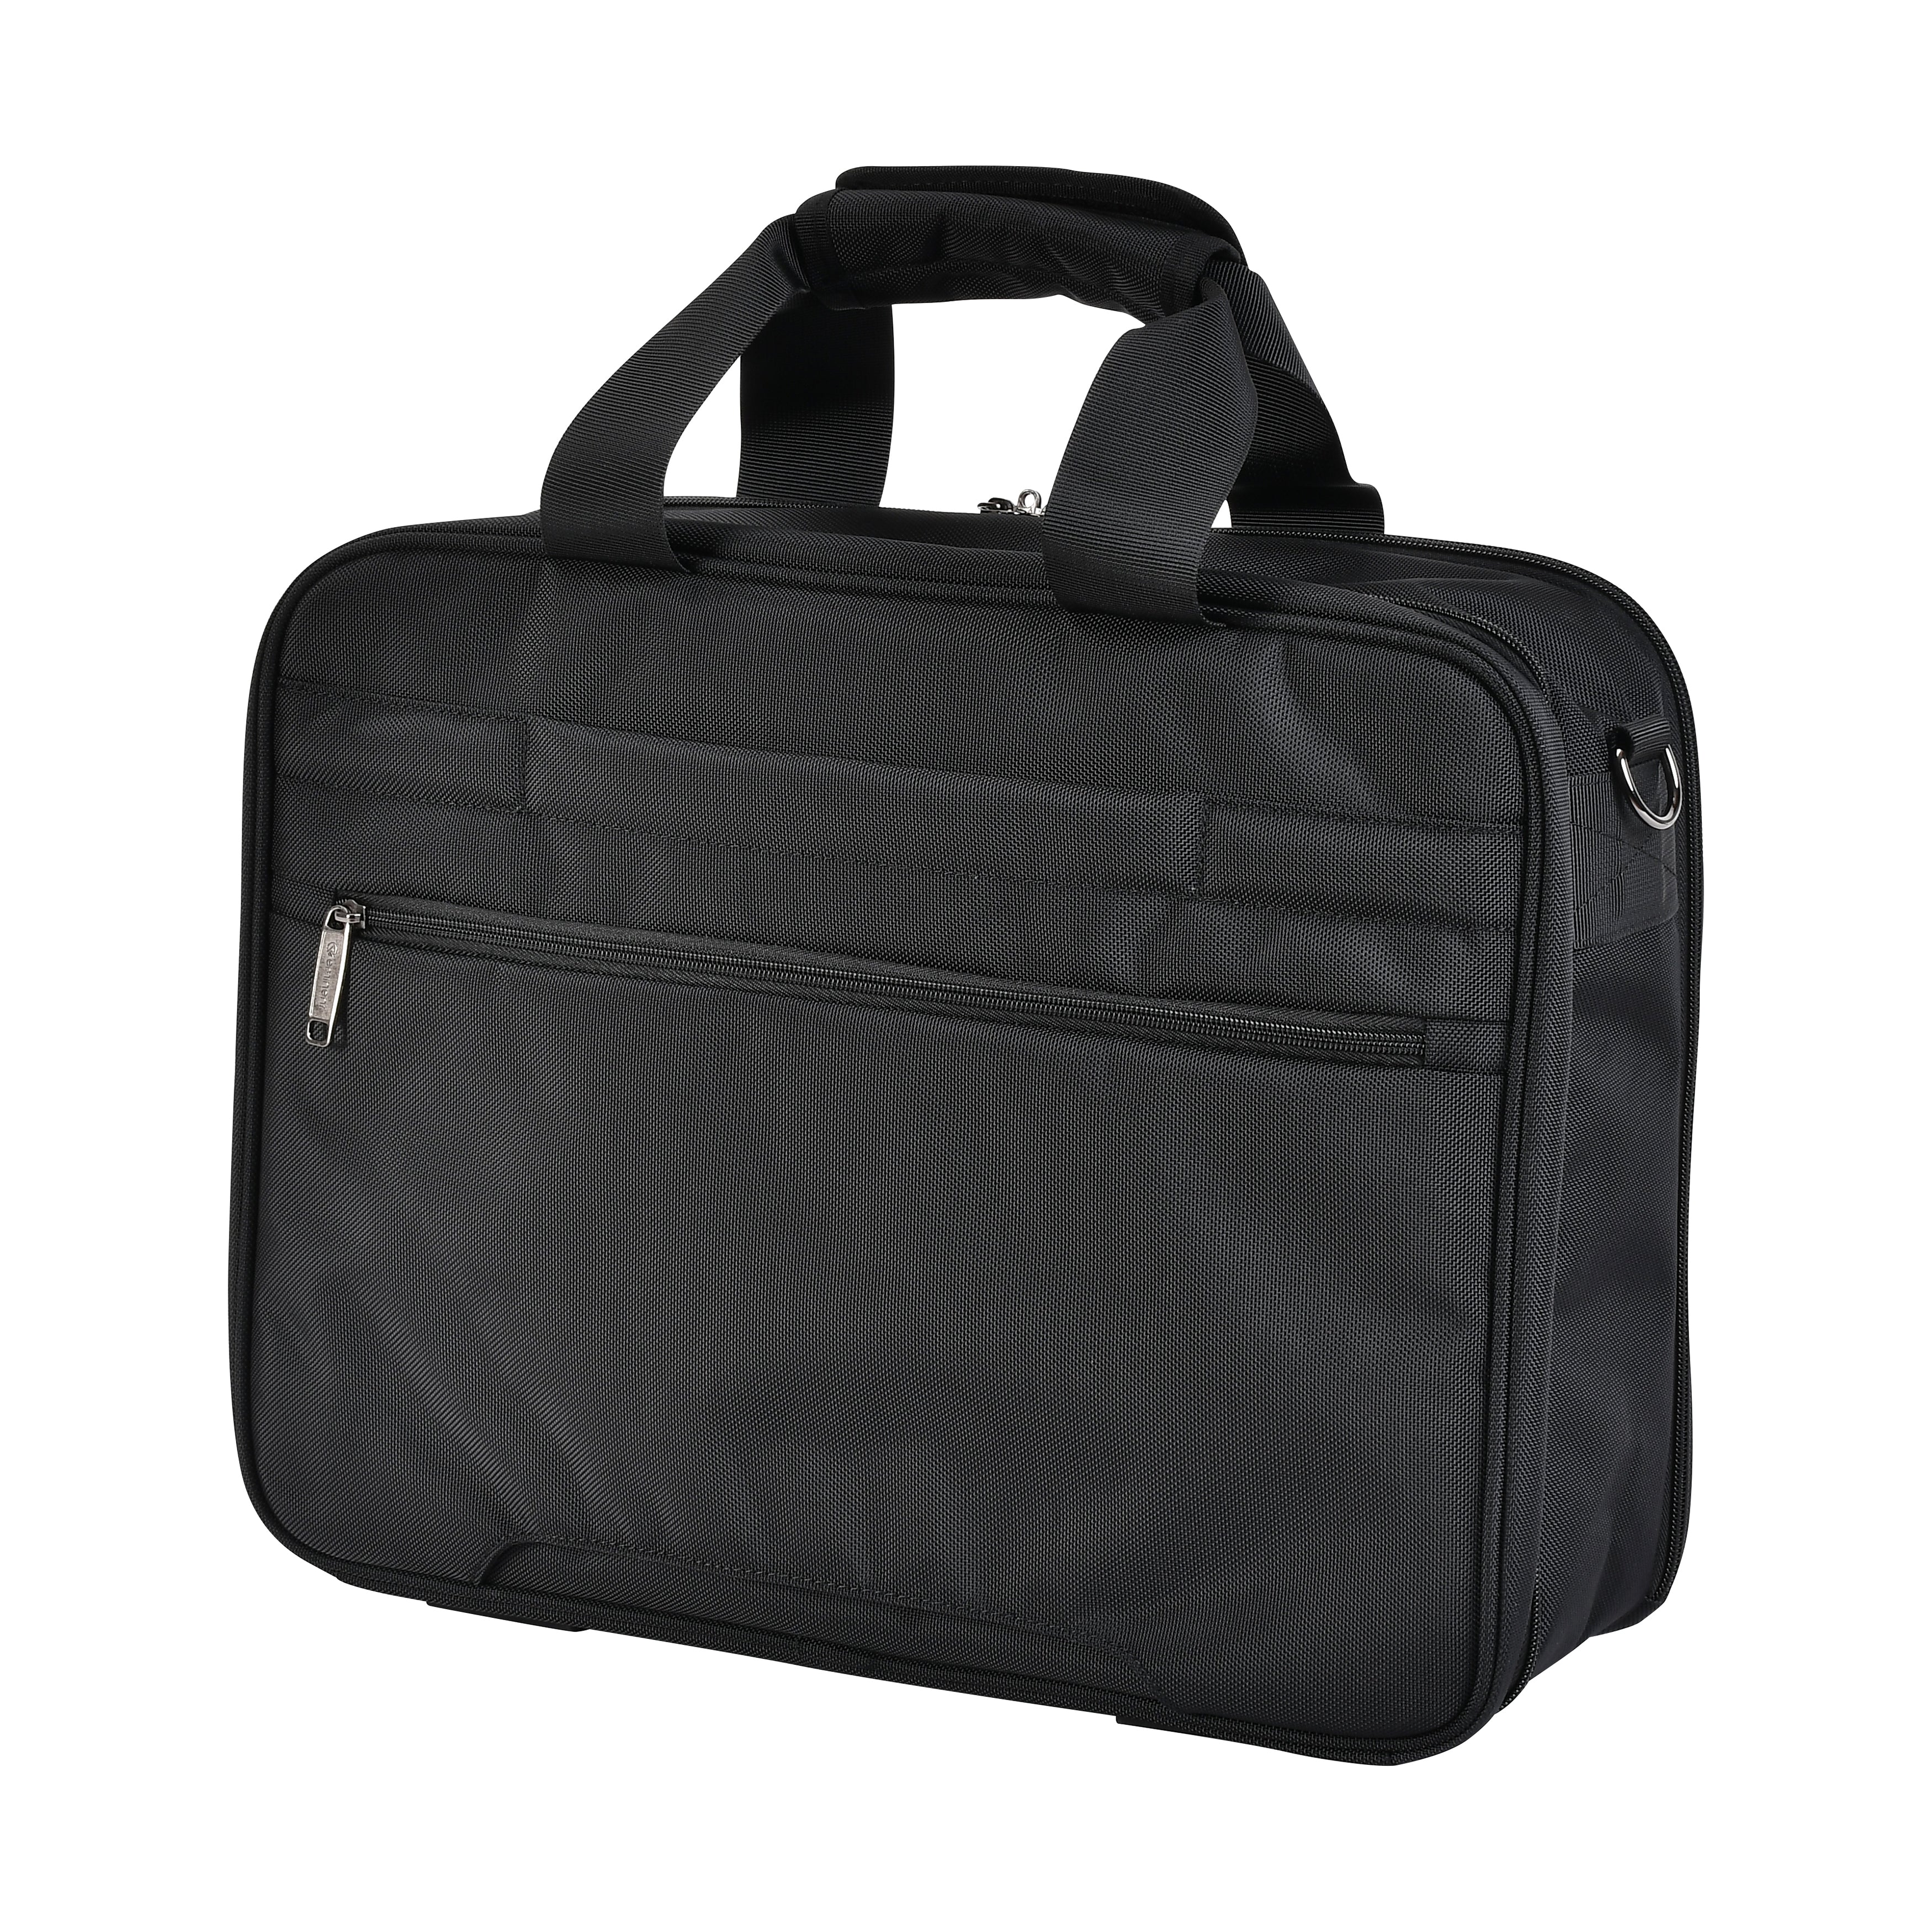 Eminent Premium Polyester Shoulder Laptop Bag 17 Inch Light Weight 180° Opening Business Laptop Briefcase for Men Women on Travel Business, S0790-17